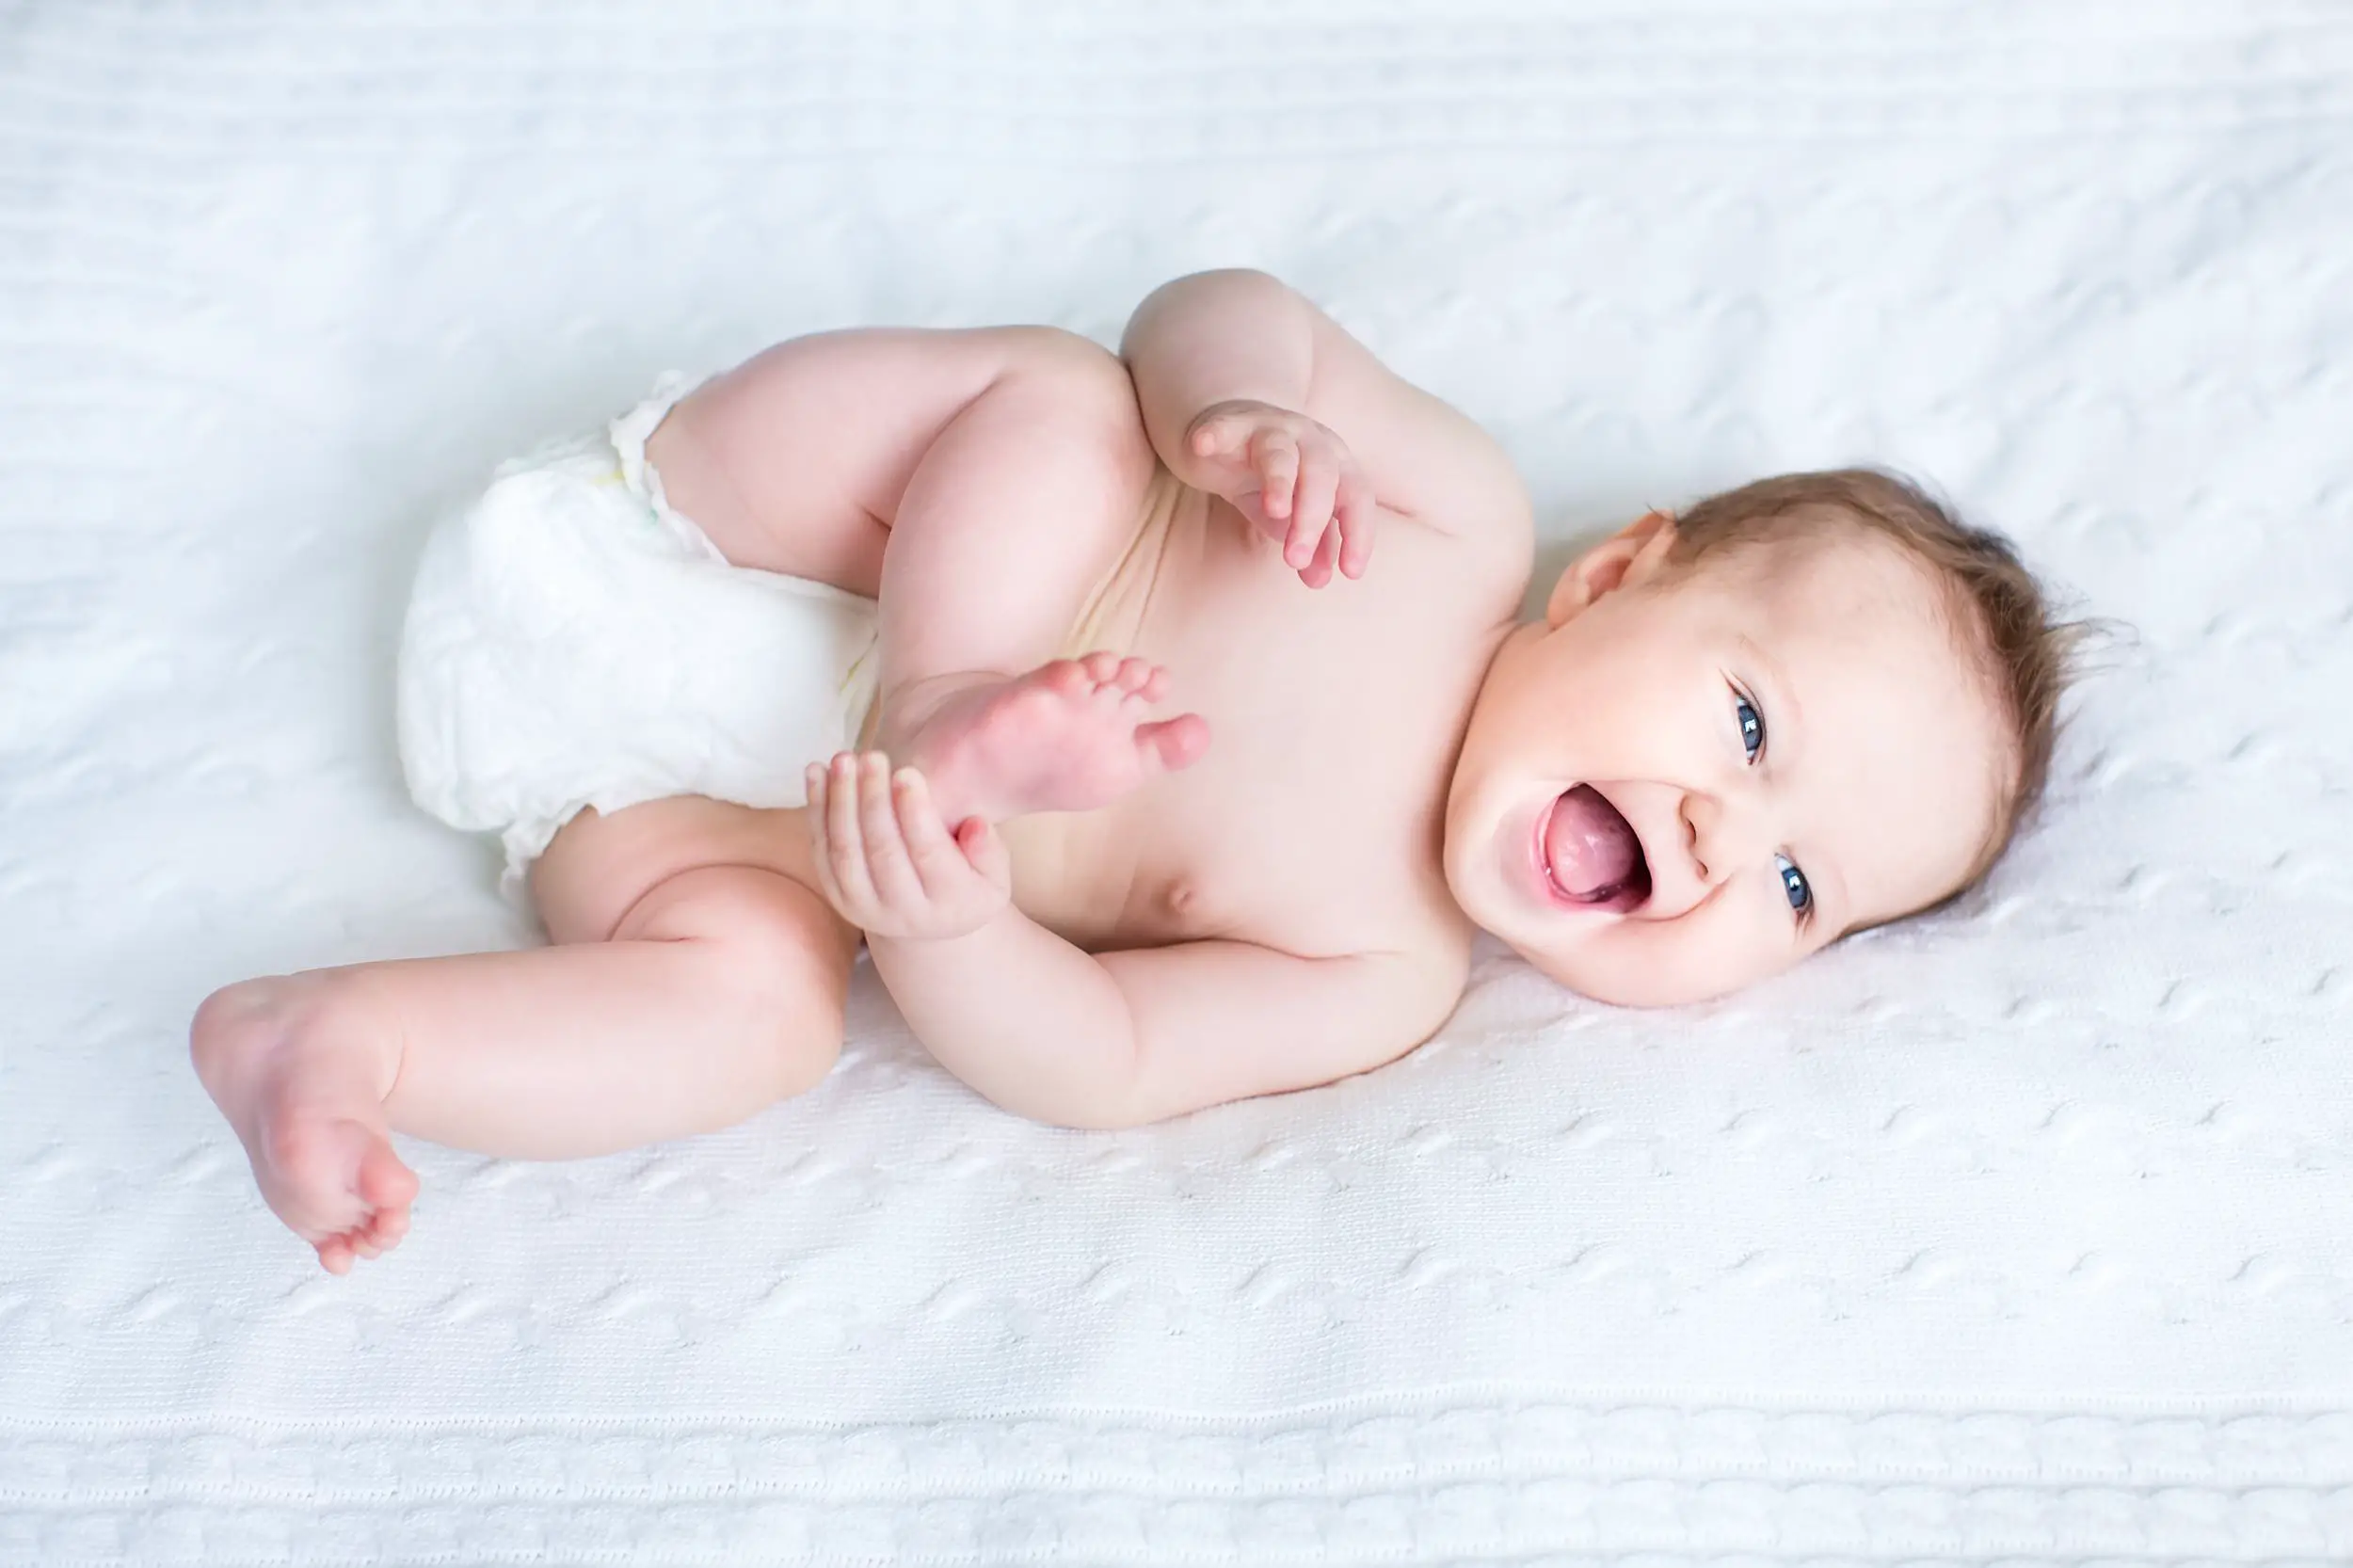 5 Best Cloth Diapers – Reviews & Buying Guide